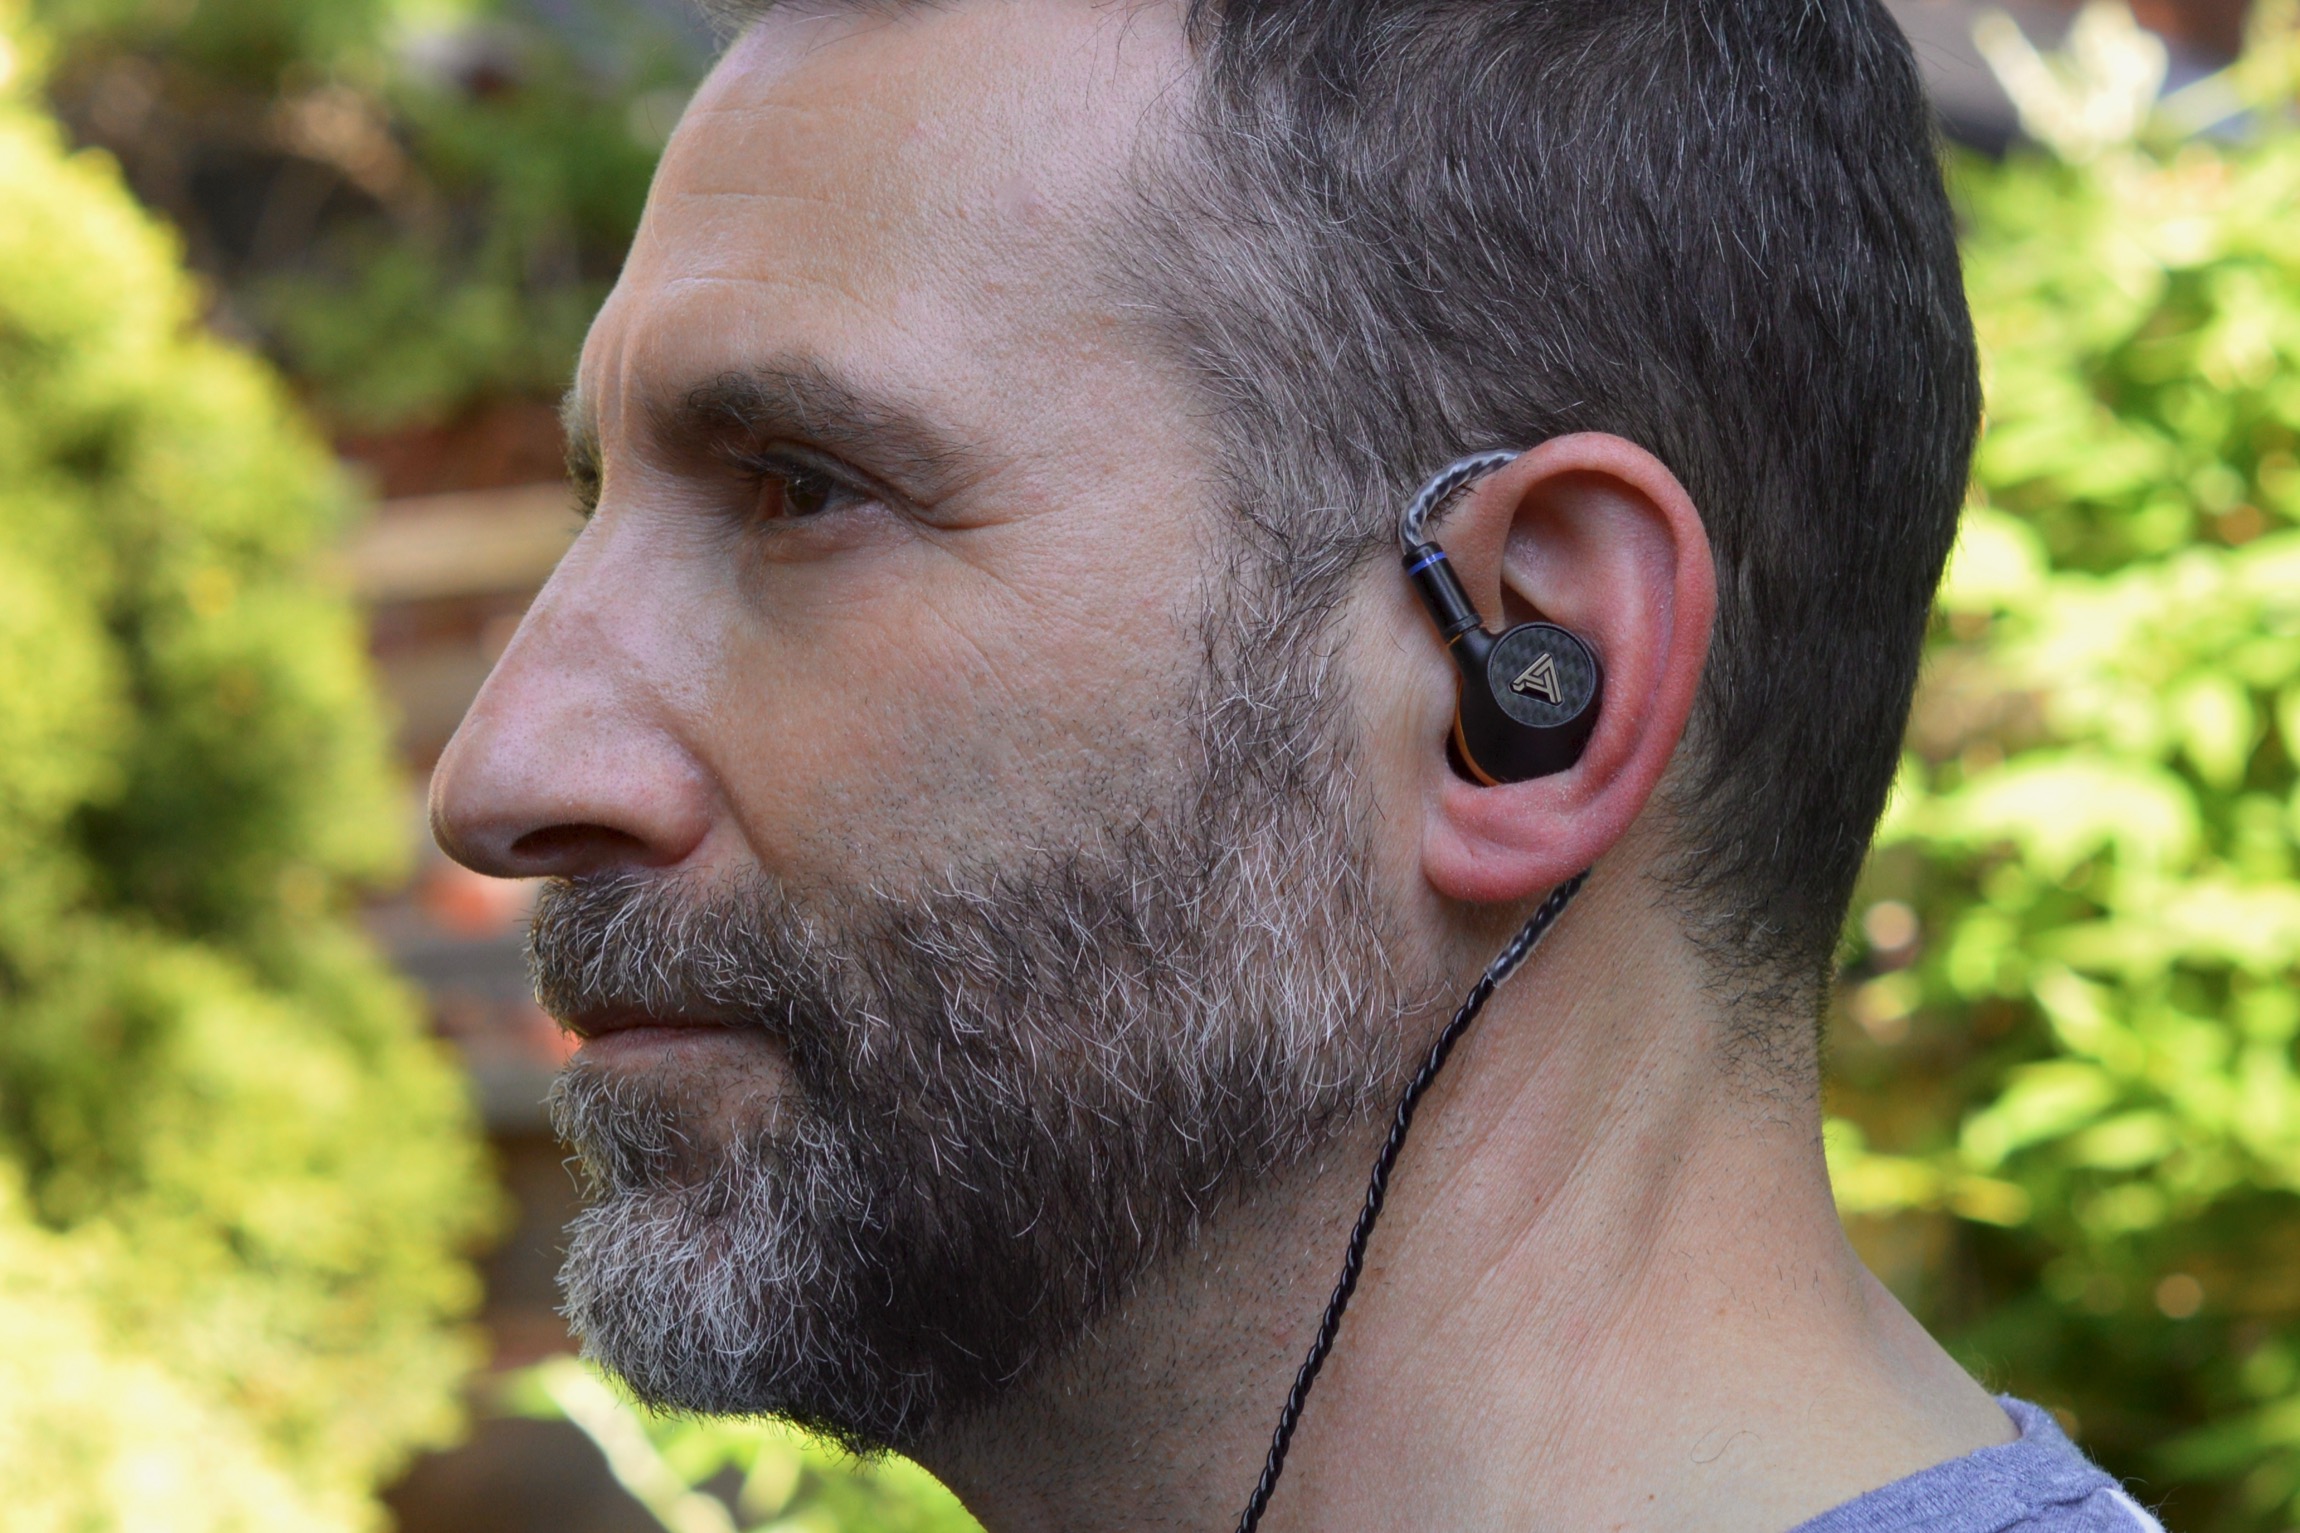 Wired in-ear monitors: From $80 to $1,500, we compare six models ...